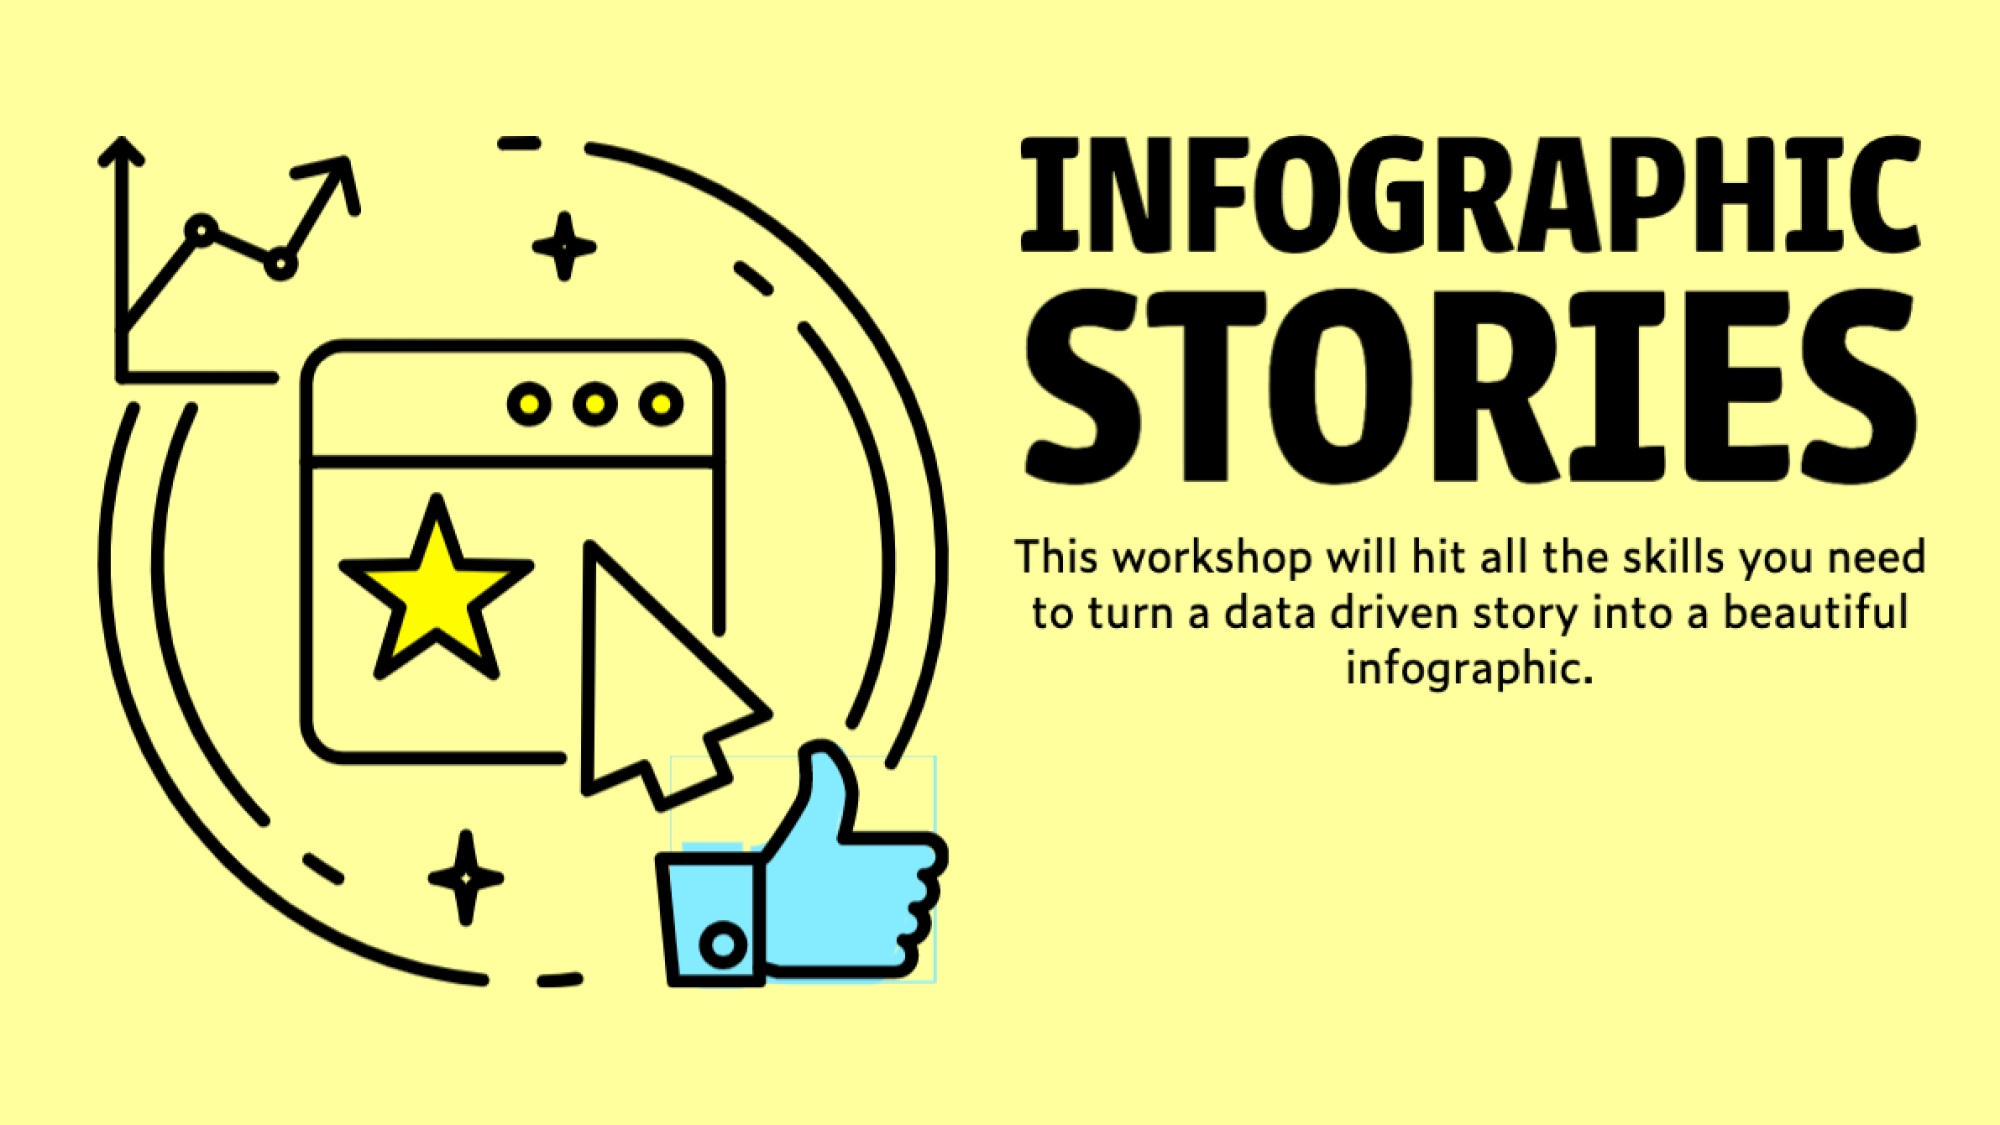 infographic stories - This workshop will hit all the skills you need to turn a data driven story into a beautiful infographic.